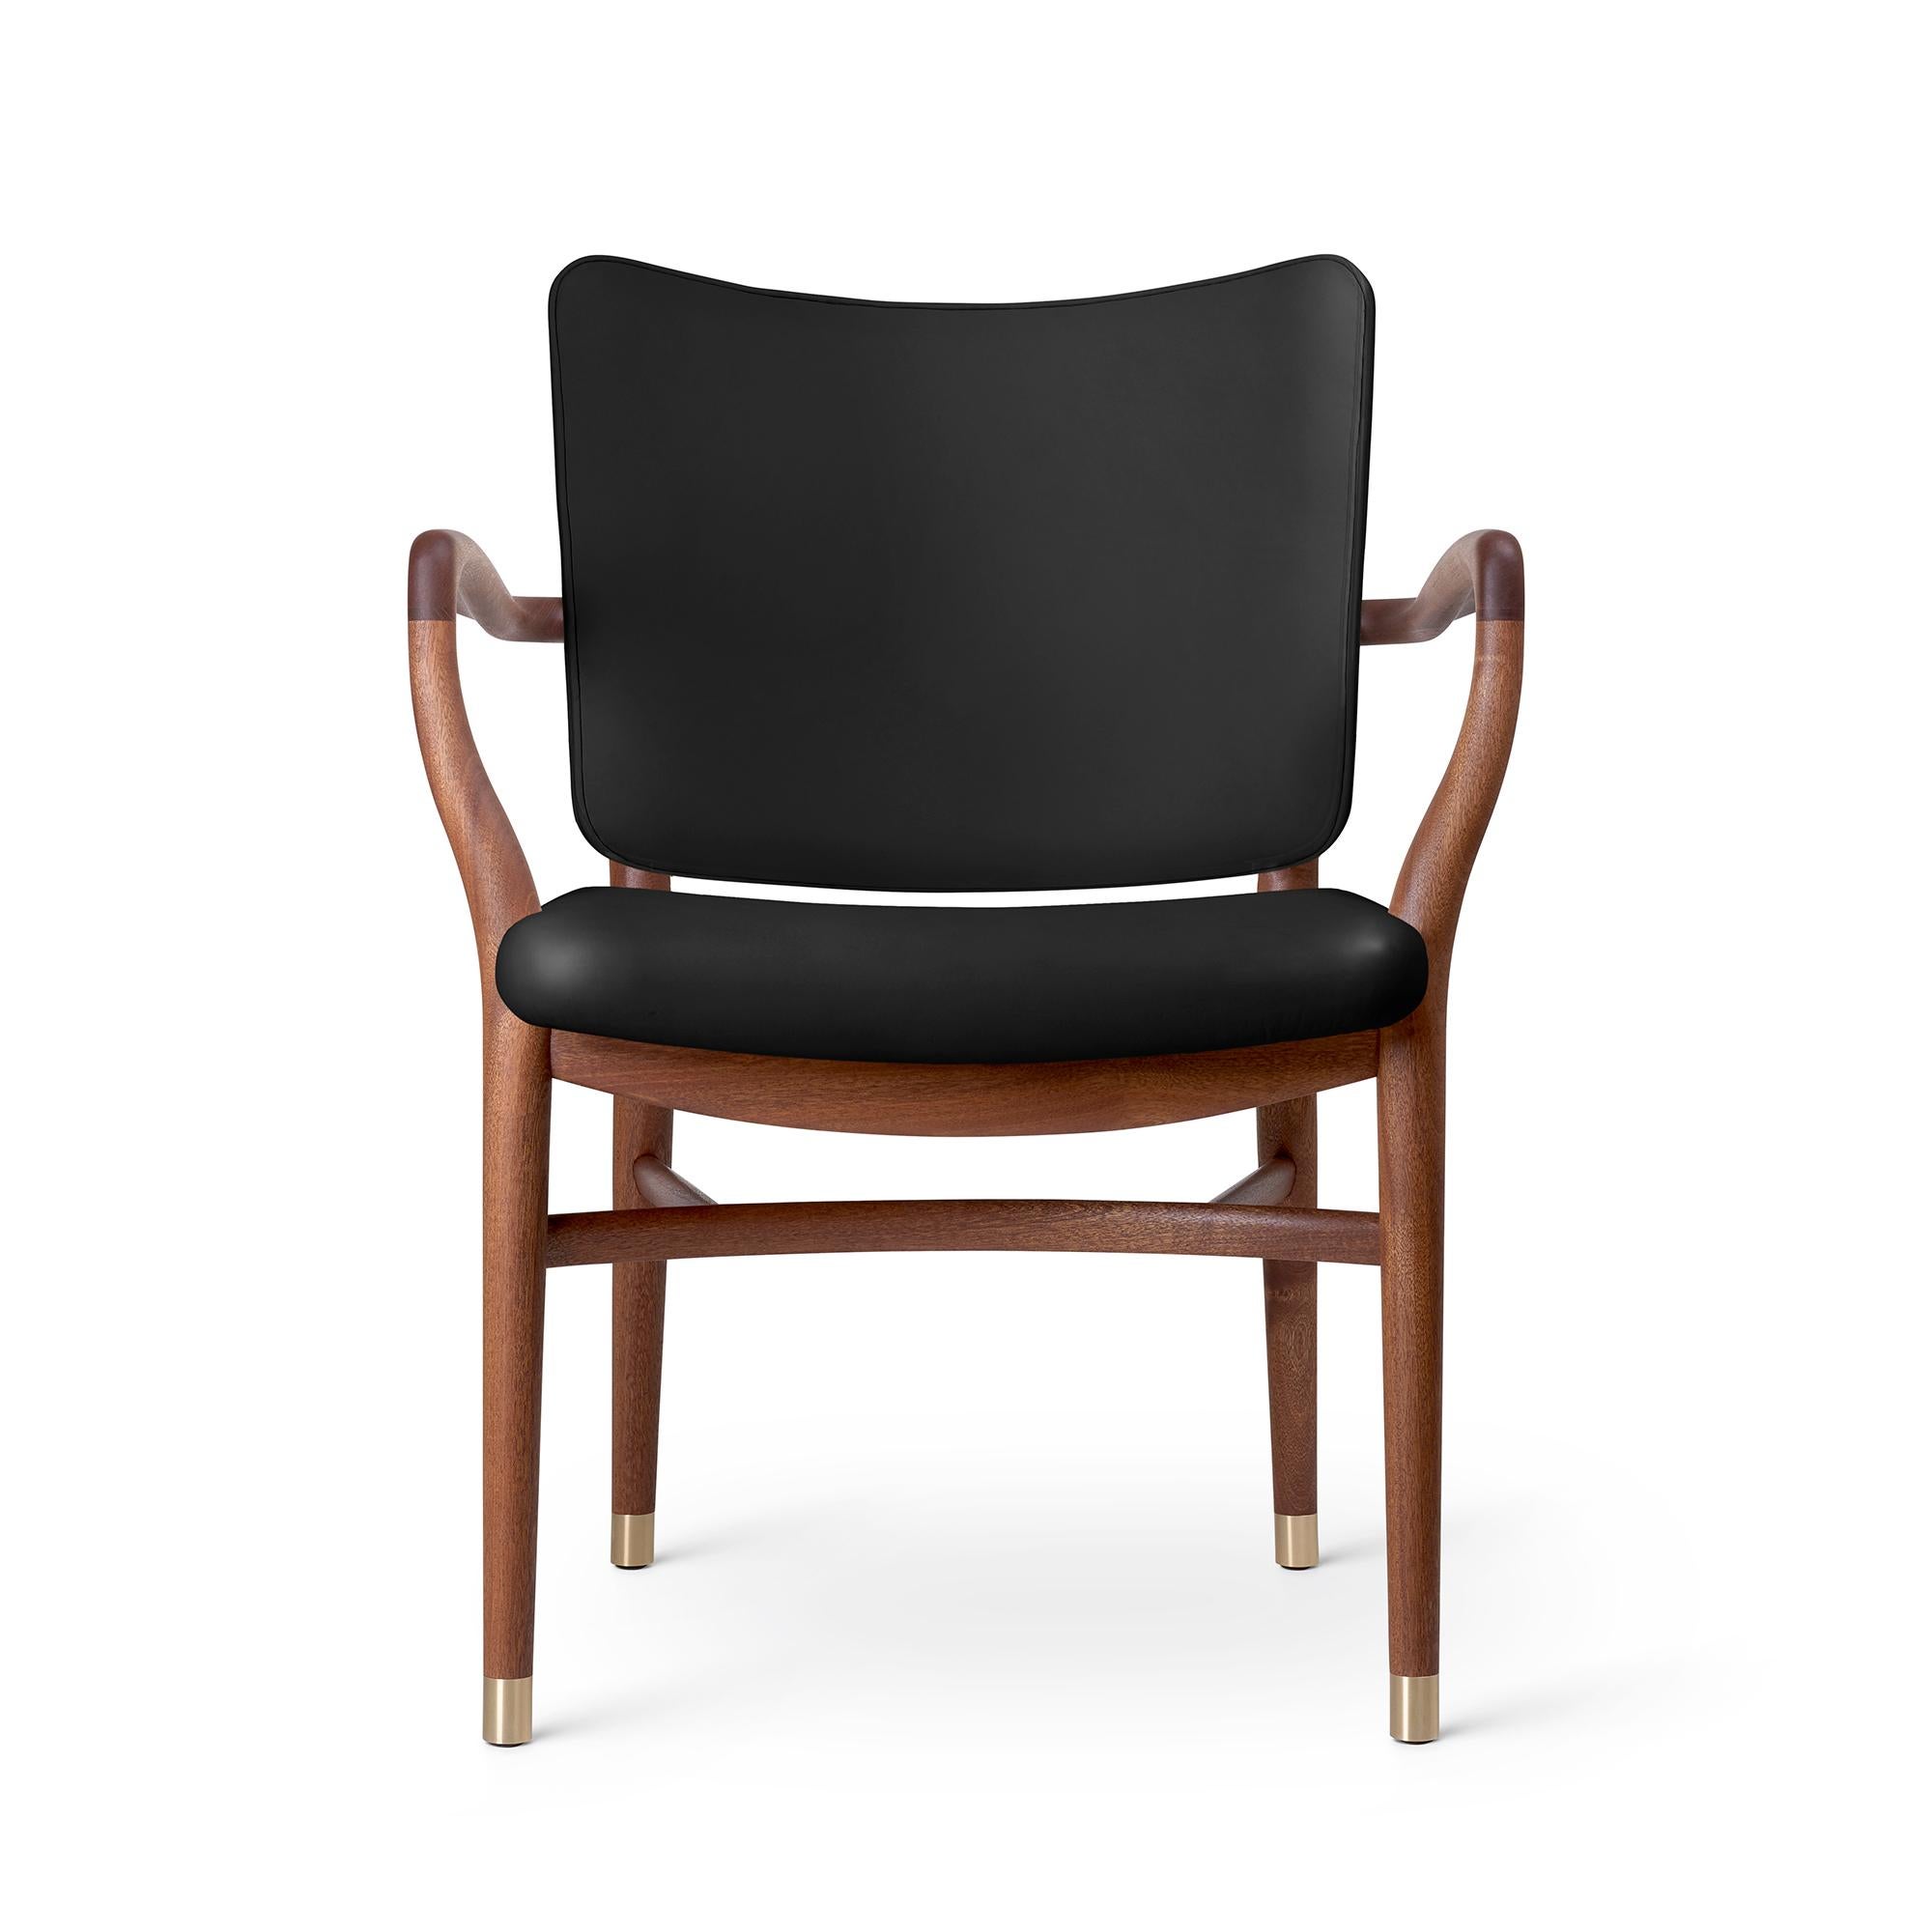 Vilhelm Lauritzen 'VLA61' Chair in Mahogany and Leather for Carl Hansen & Son.

The story of Danish Modern begins in 1908 when Carl Hansen opened his first workshop. His firm commitment to beauty, comfort, refinement, and craftsmanship is evident in